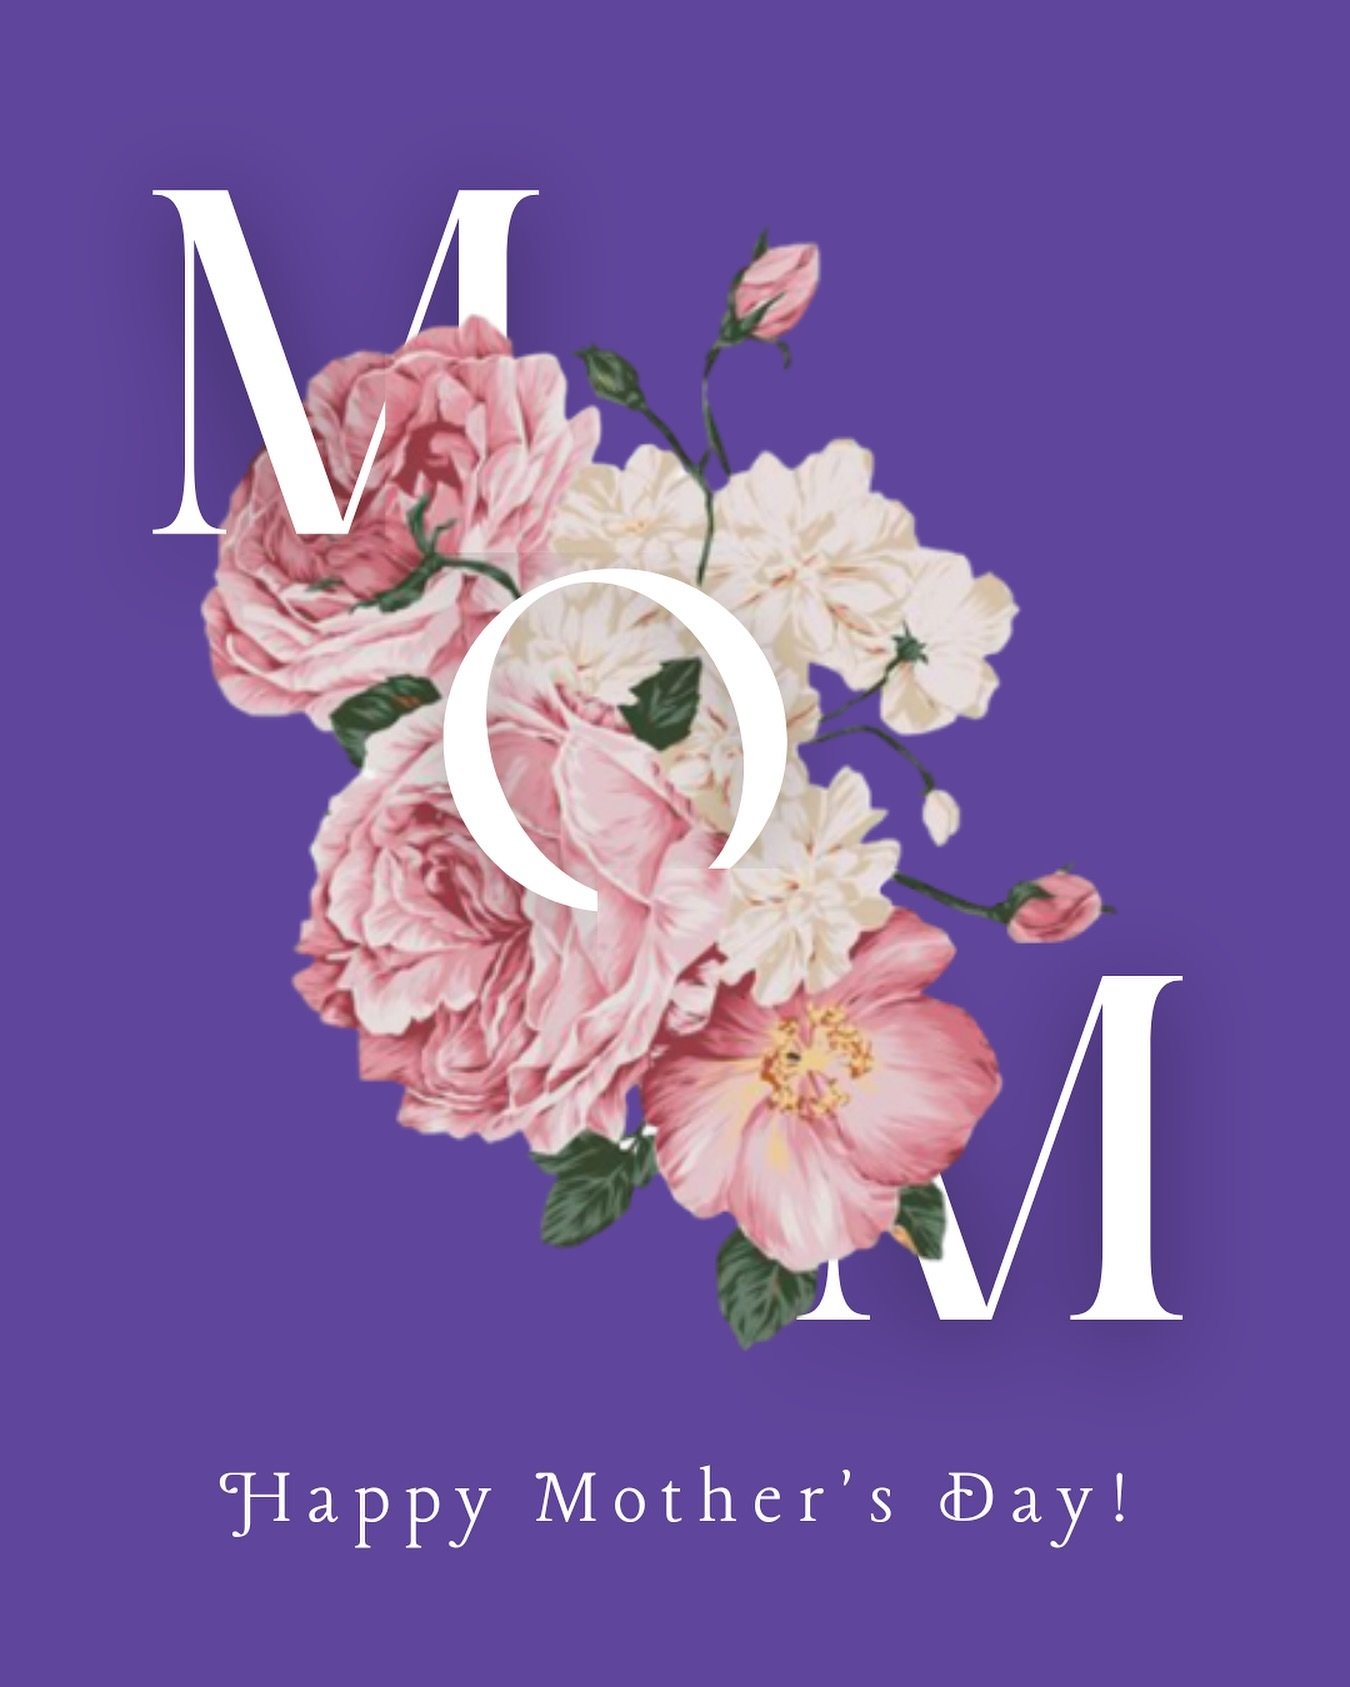 To our Mums! Our cheerleaders, our confidantes, our advocates, our shoulders to cry on, our kicks-in-the-butt-when-we-need-it, and our soft place to land!  Here&rsquo;s to the incredible women that have made it possible for all of us to be who we are